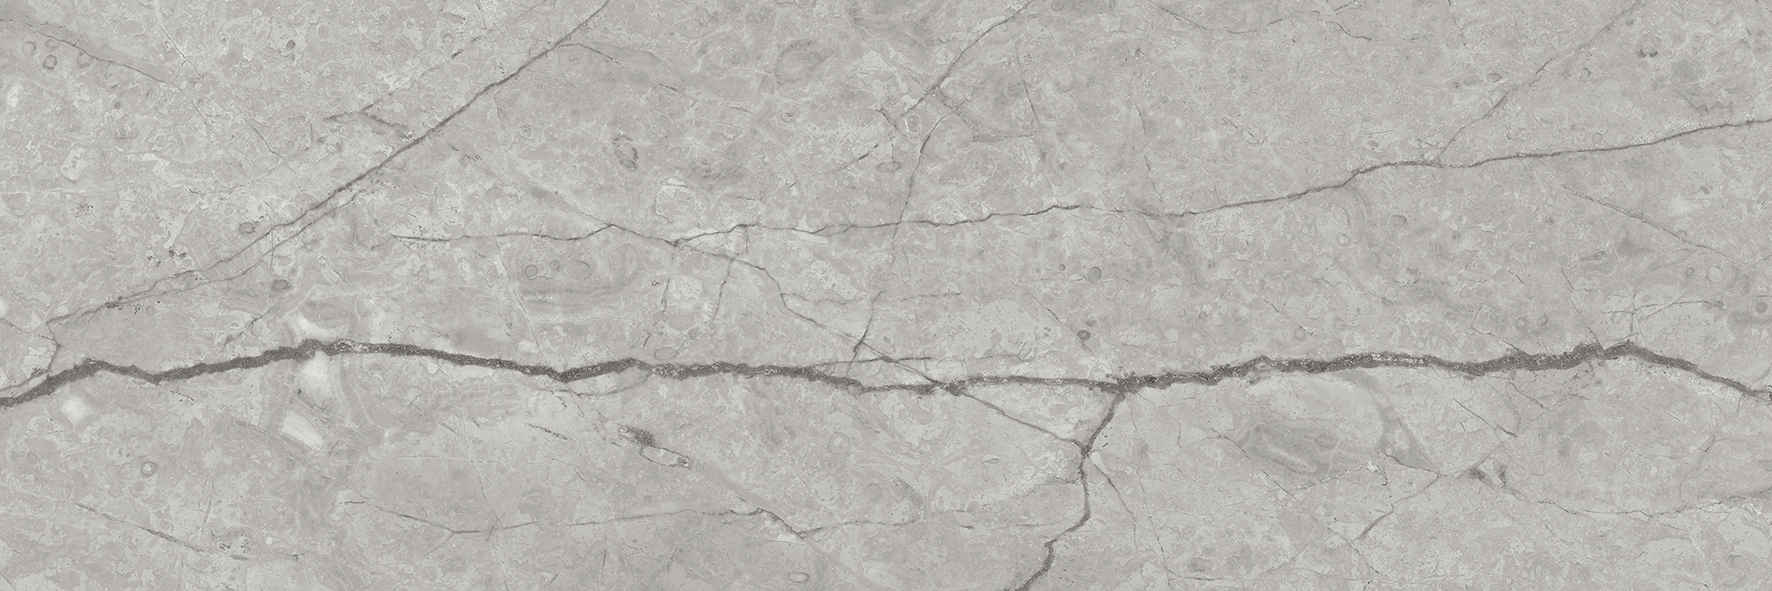 paradiso argento pattern glazed porcelain field tile from la marca anatolia collection distributed by surface group international polished finish rectified edge 4x12 rectangle shape